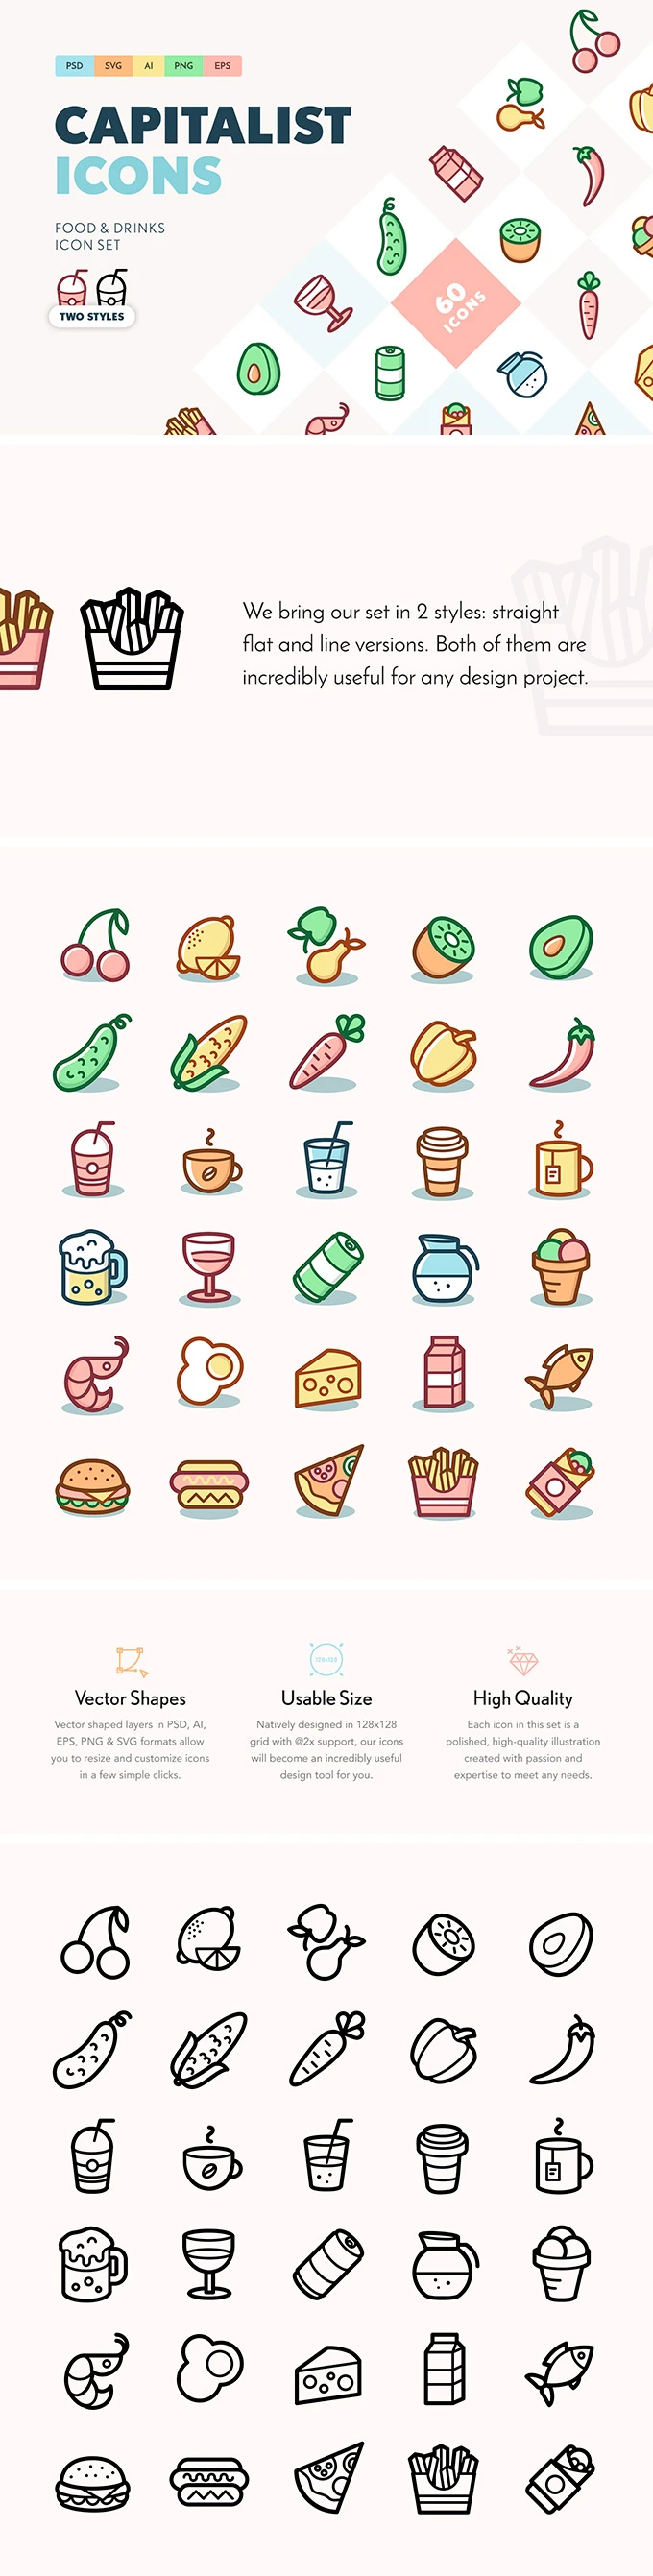 Capitalist Food and Drinks Icon Set - A free gastronomic icon set in various formats by Pixelbuddha